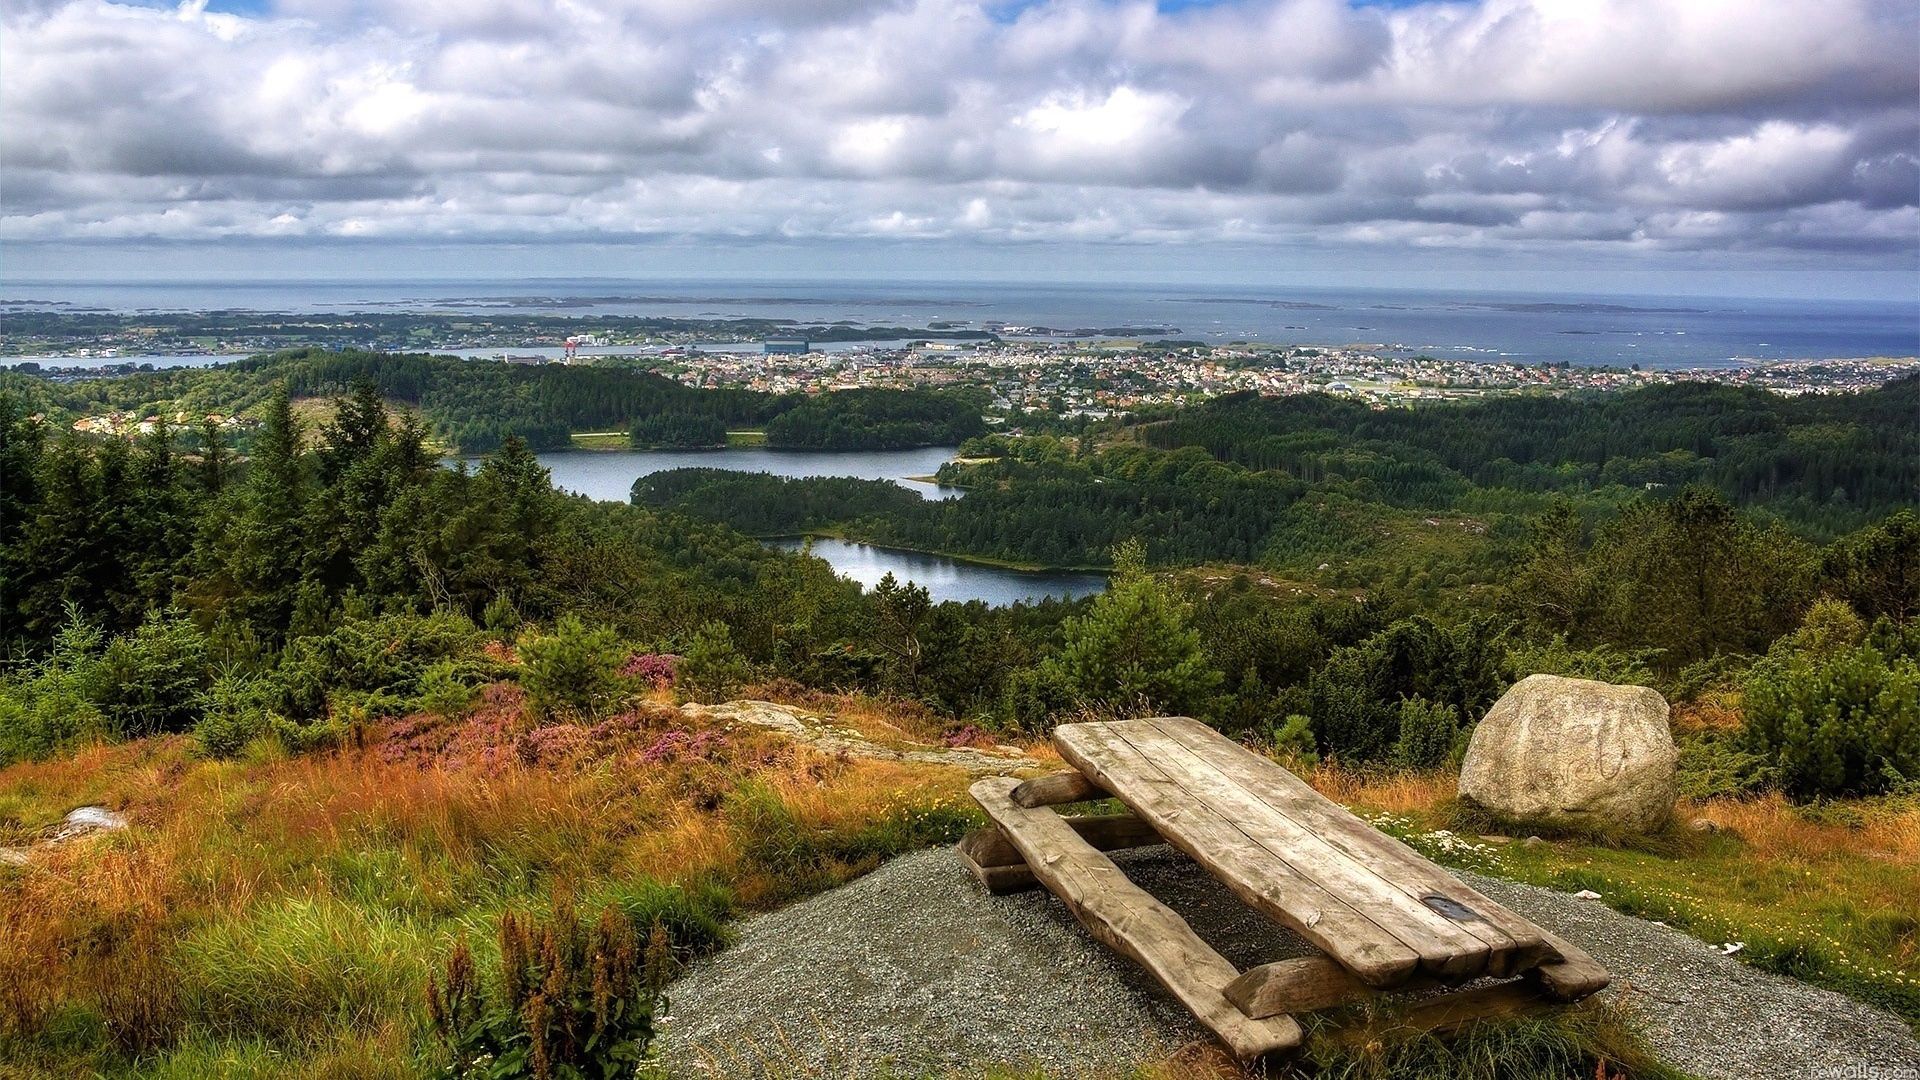 benches, nature, stones, city, forest, rise, table, view, elevation, islands 5K